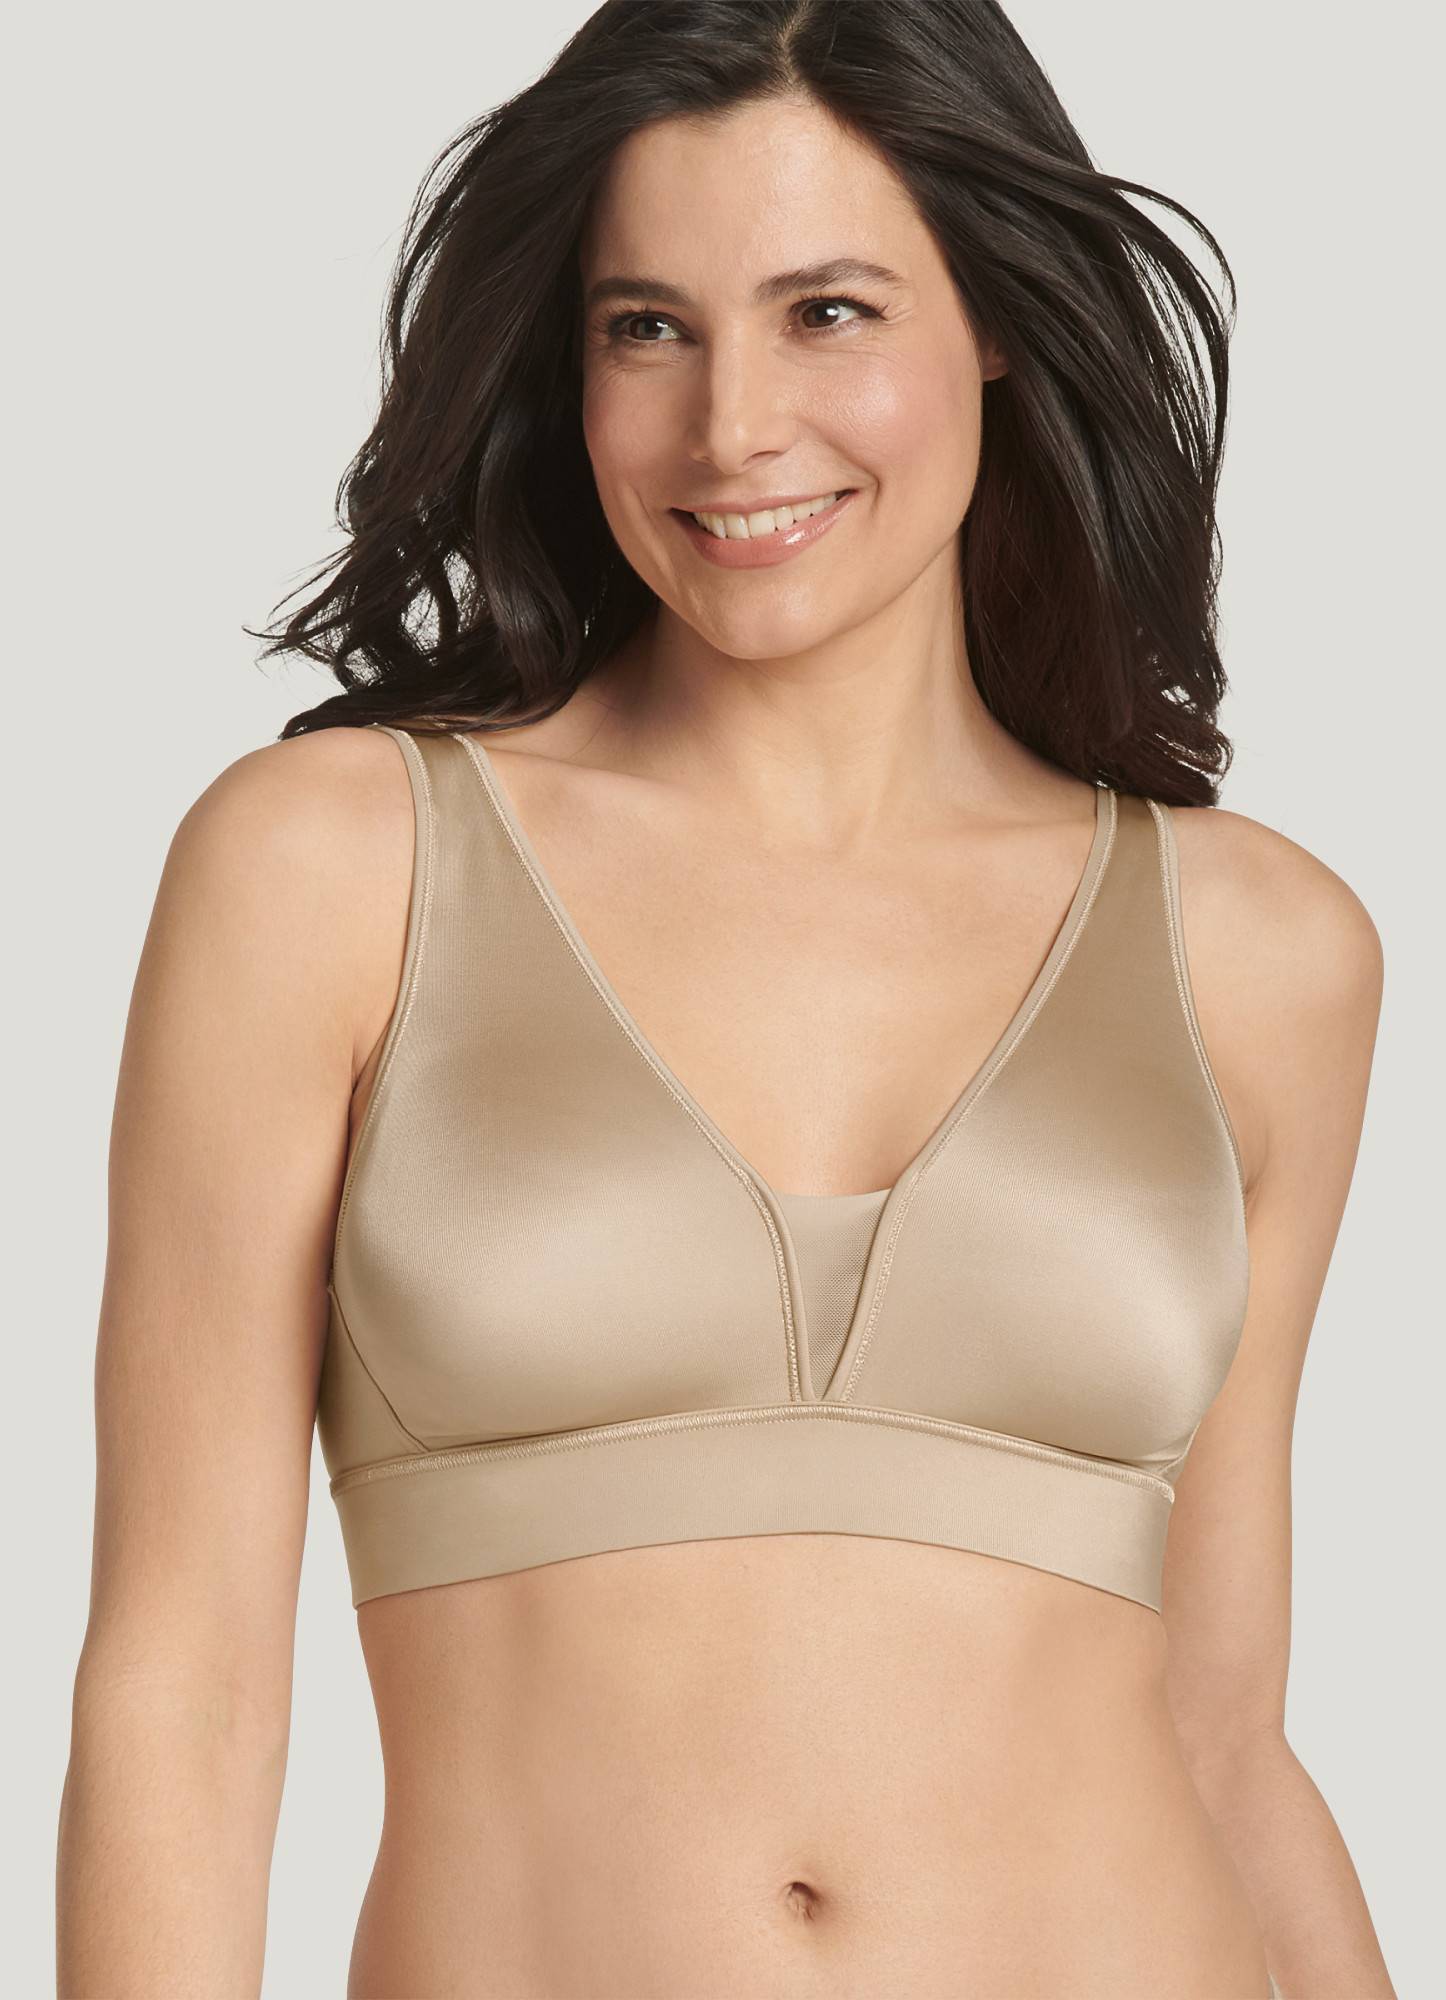 Fill up on comfort every day with these bras from Jockey! Wireless